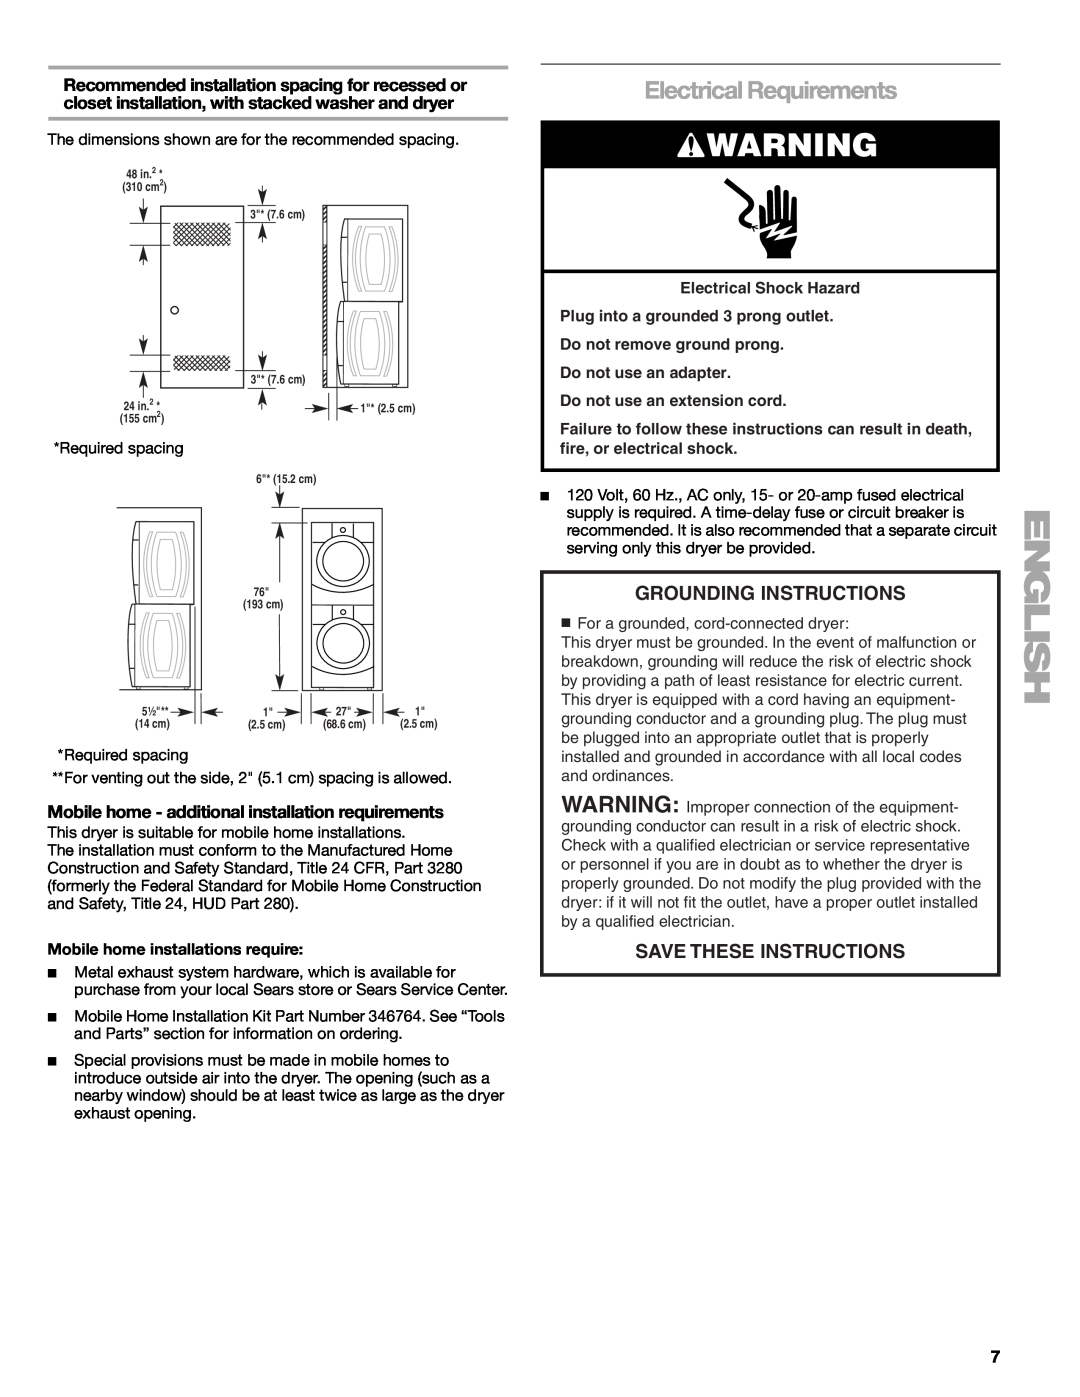 Suunto 110.9772 Electrical Requirements, Grounding Instructions, Save These Instructions, Do not use an extension cord 